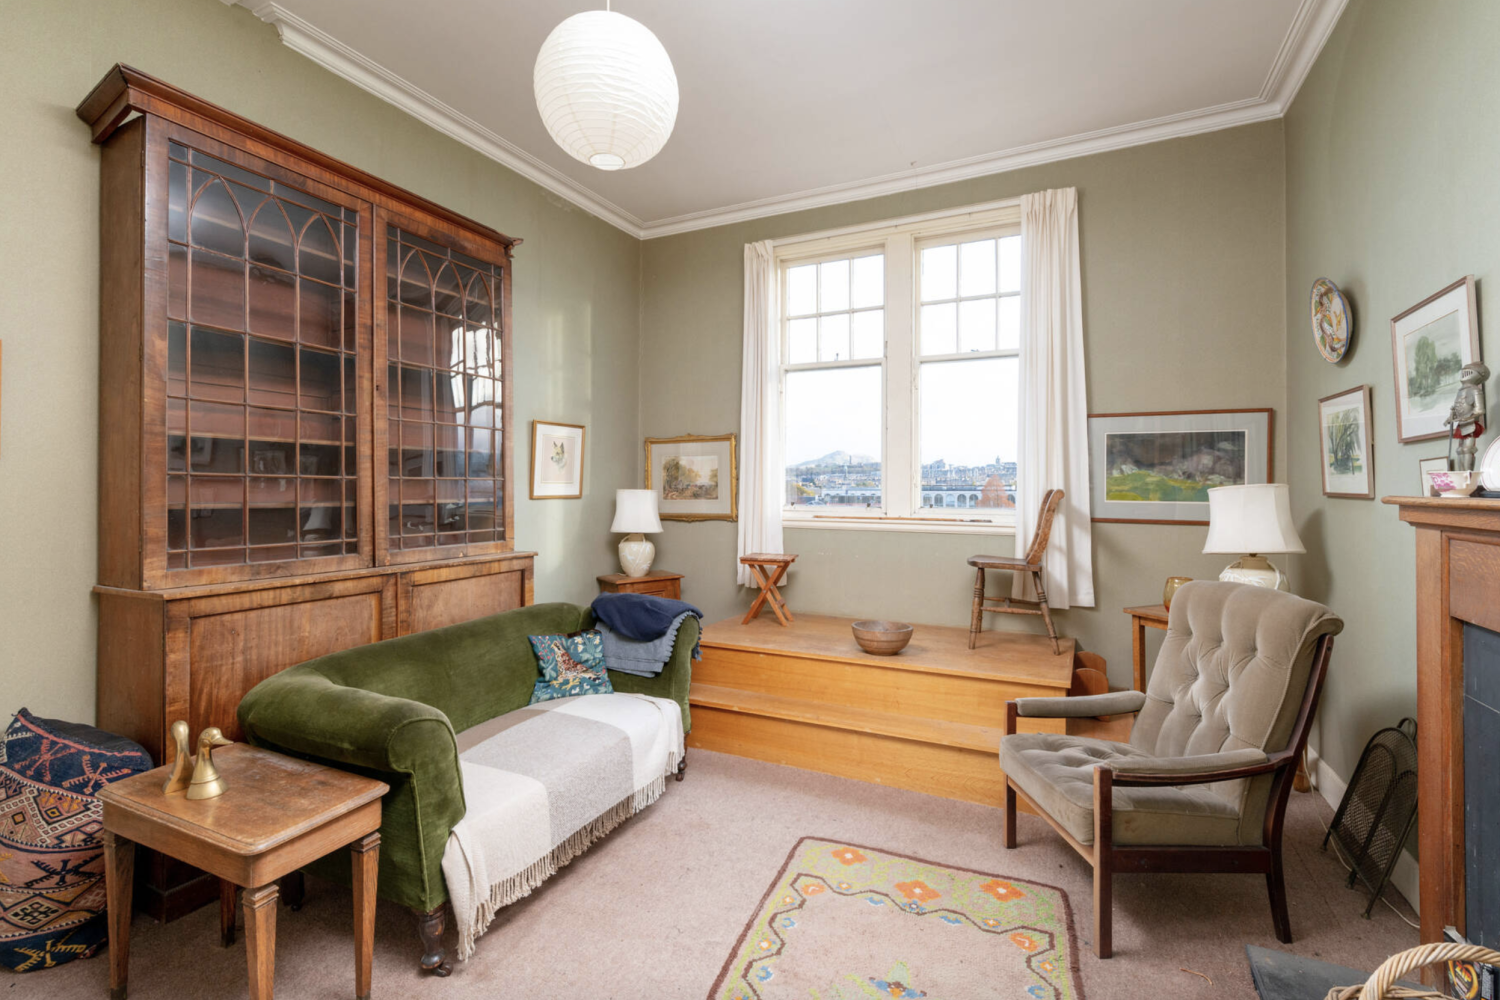 Interior of a Victorian apartment living room with pale green walls, a dresser, sofa and armchair and a viewing platform with chairs at the window